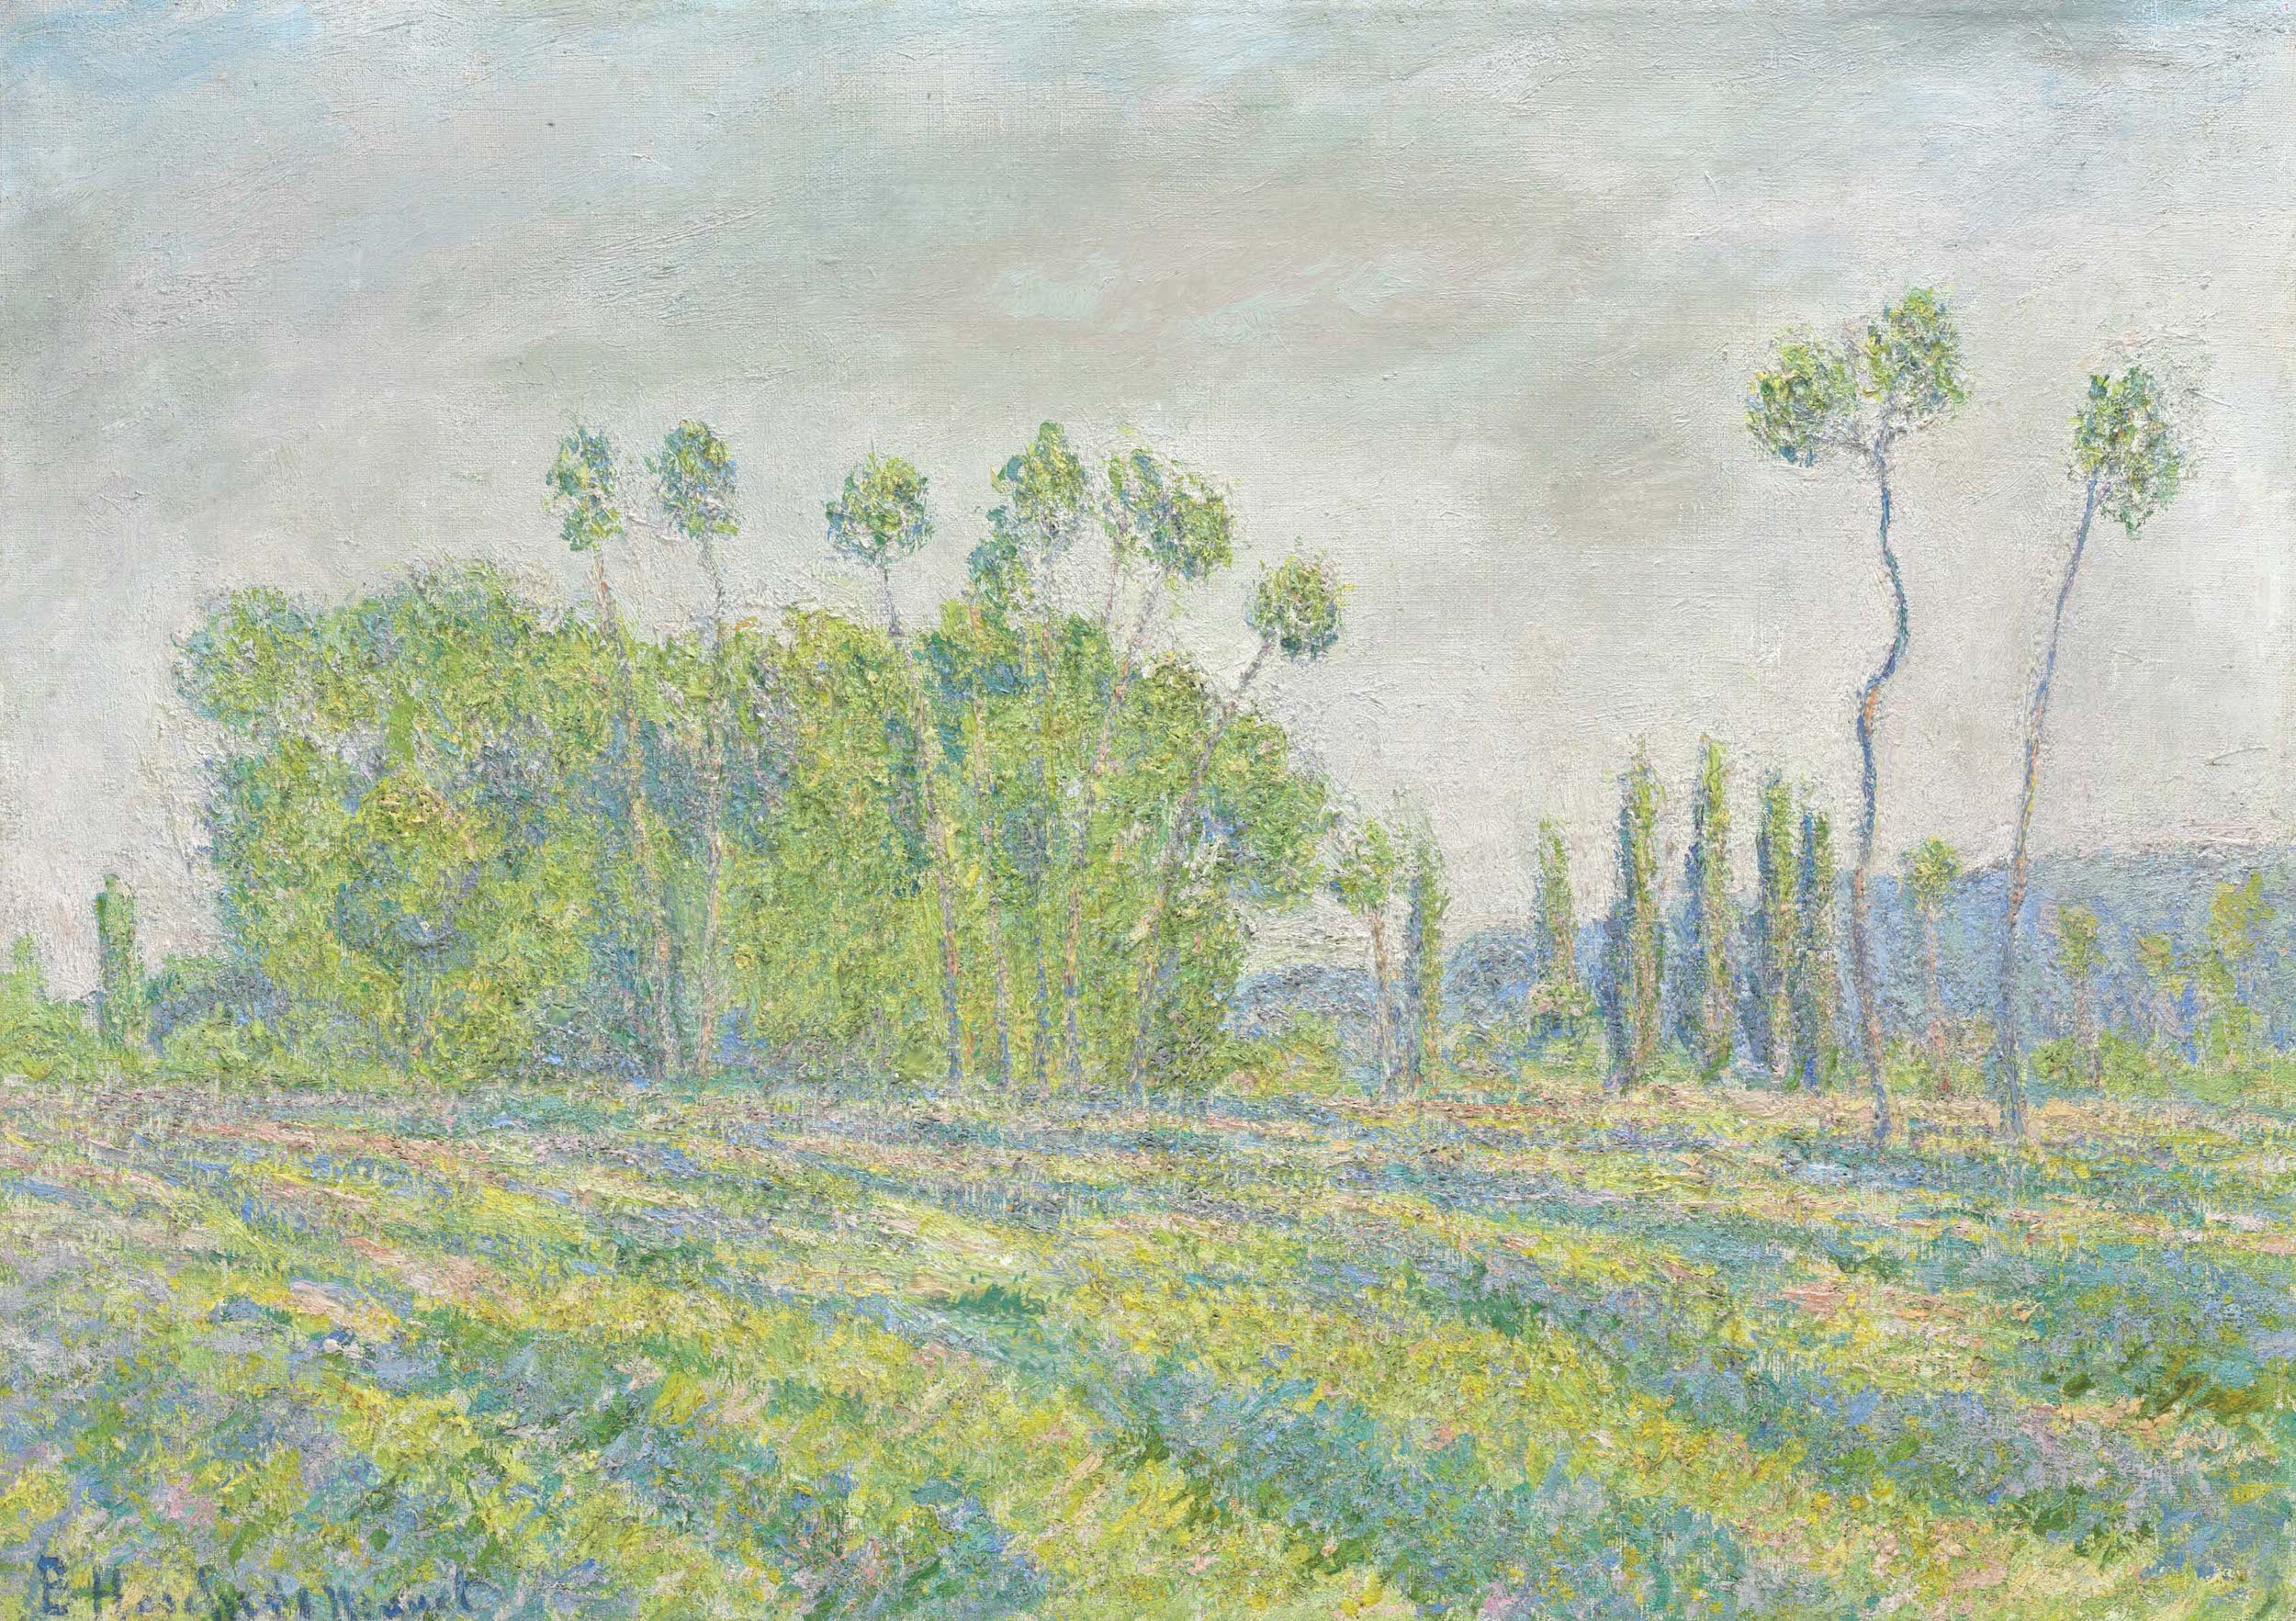 Giverny, Poplars of Ajoux by Blanche Hoschedé Monet - c. 1896 - 46.4 x 65.2 cm private collection